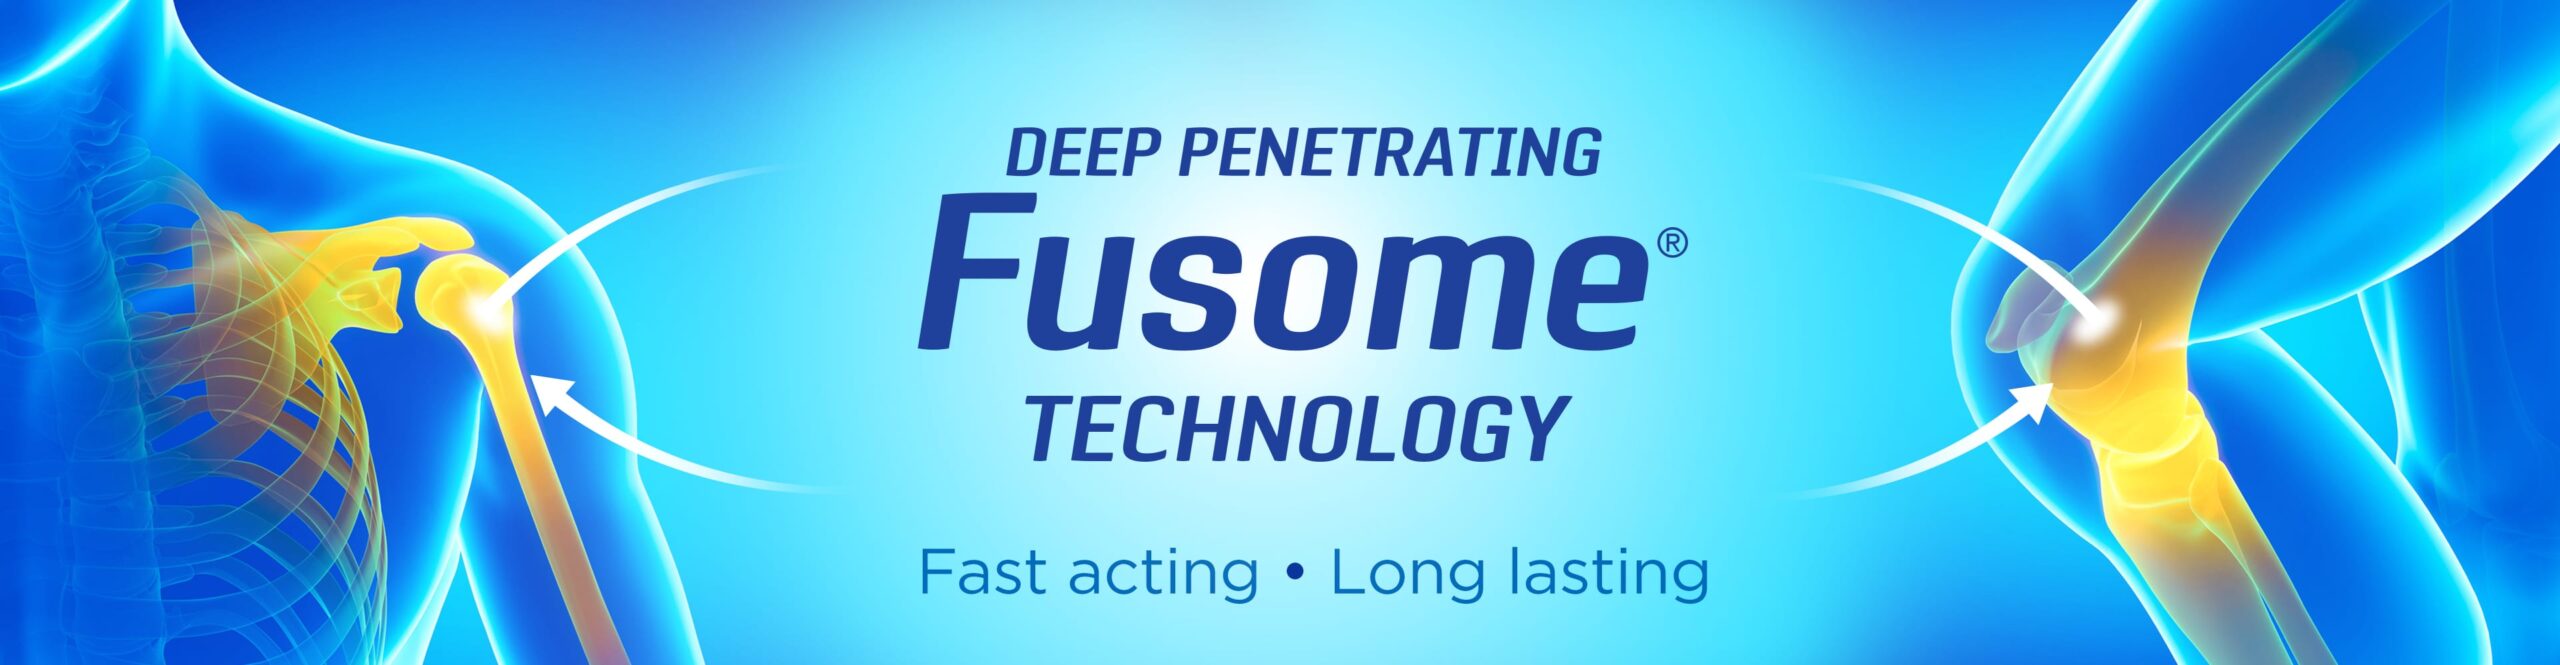 Deep penetrating Fusome® technology - Fast acting and long lasting